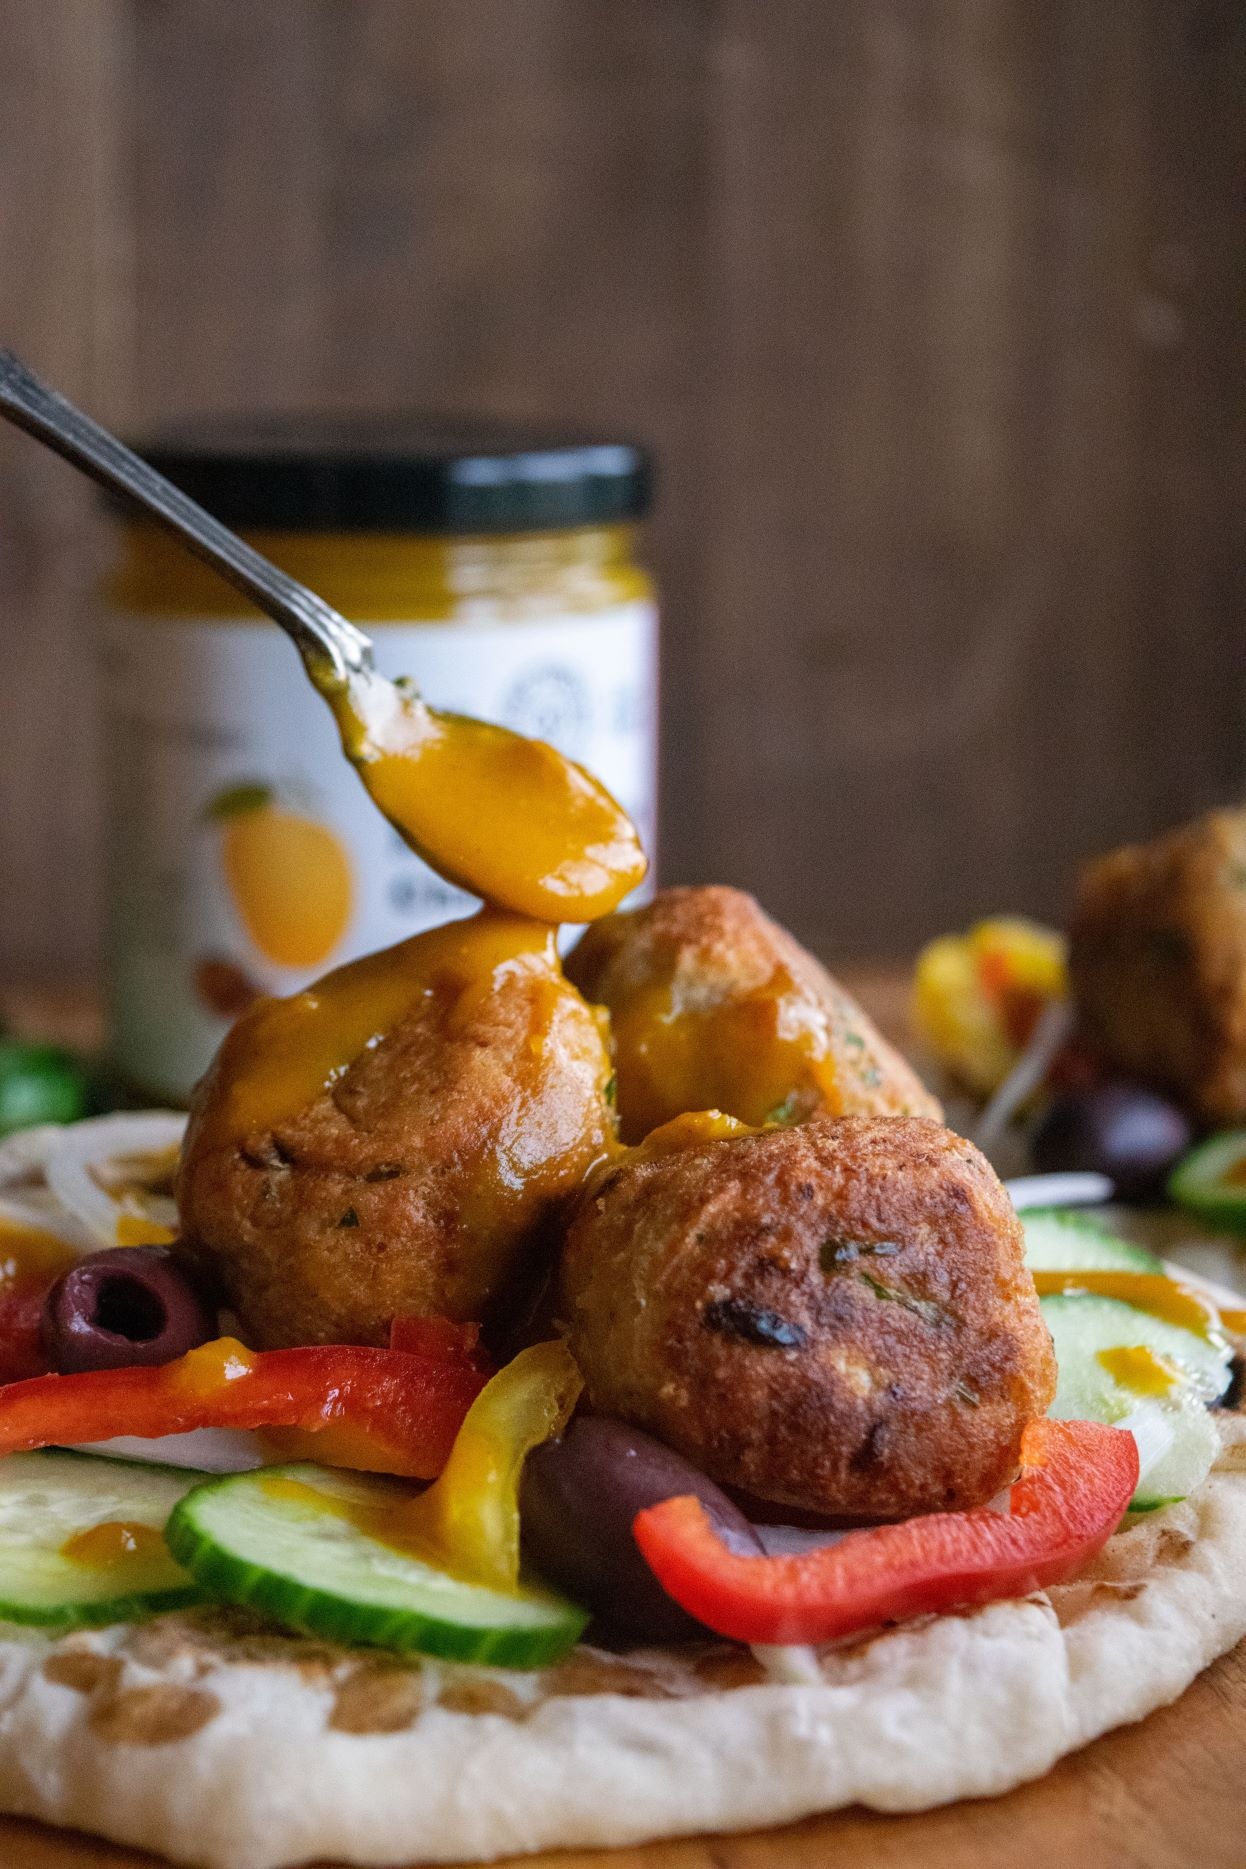 Mouthwatering falafel and veggies on pita served with our no sugar added mango chutney from Pure Indian Foods